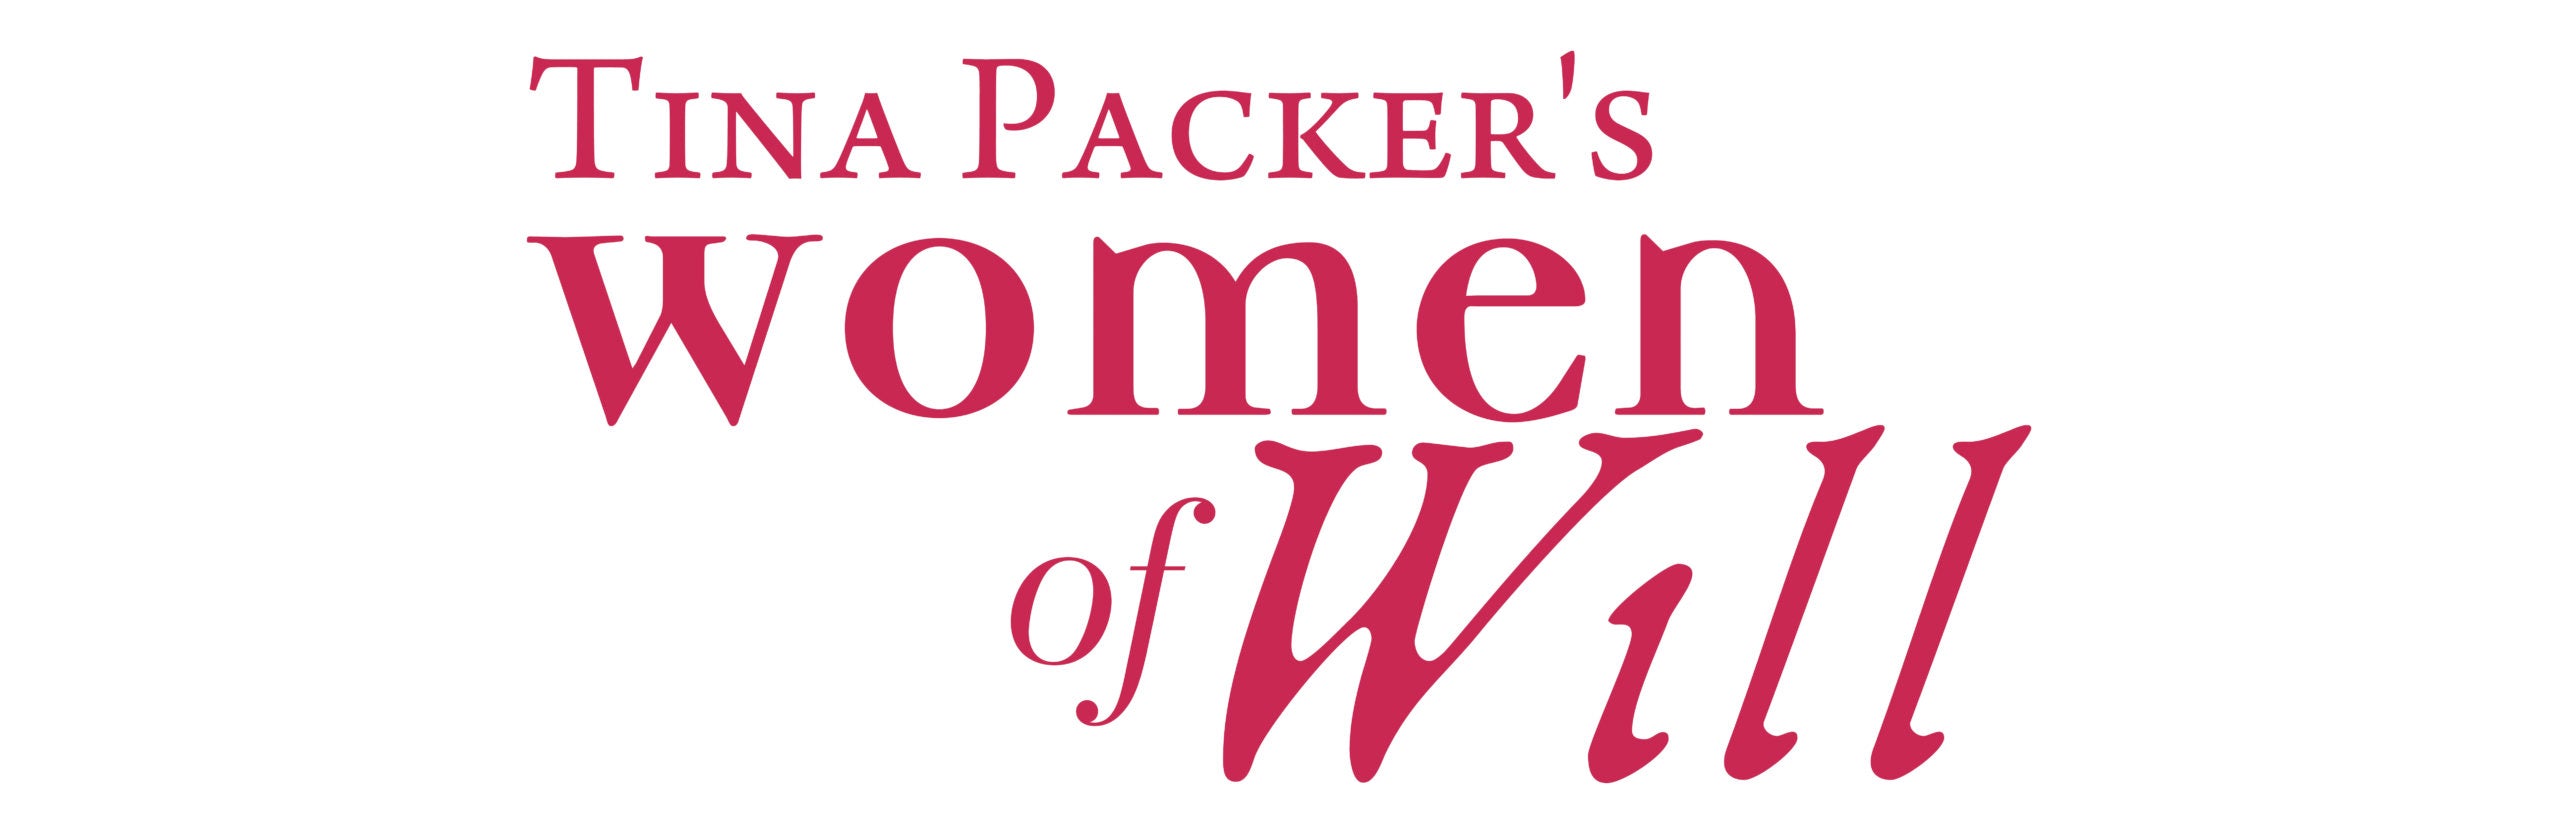 Book Signing with Tina Packer, July 25